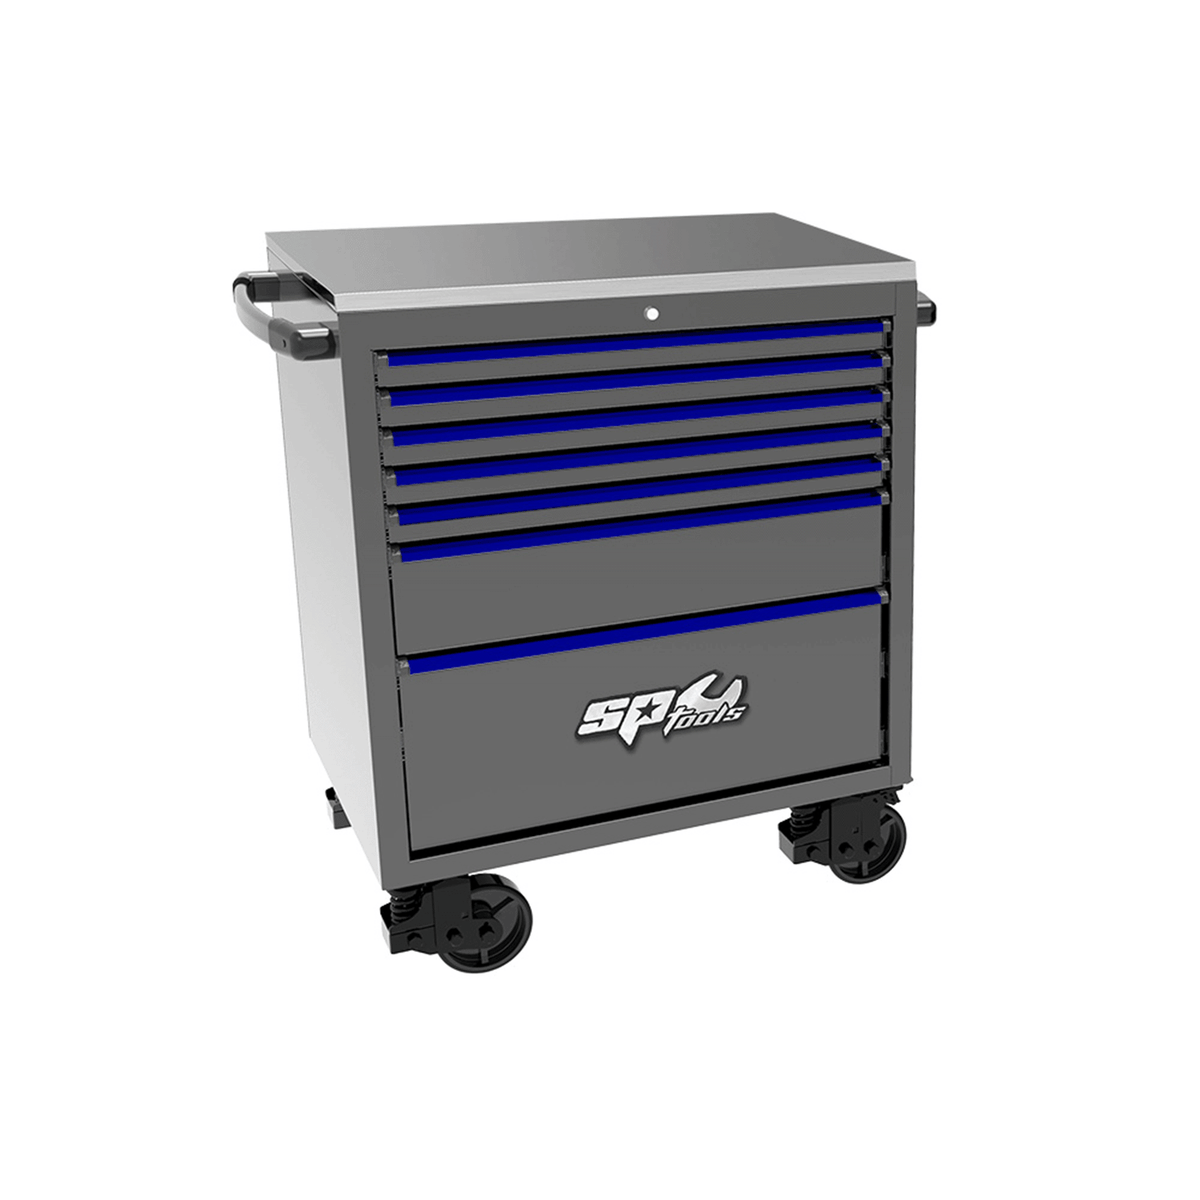  Full Bank Service Tool Cabinet/Cart, 34 inches Wide Storage  Organizer on Wheels Blue : Office Products